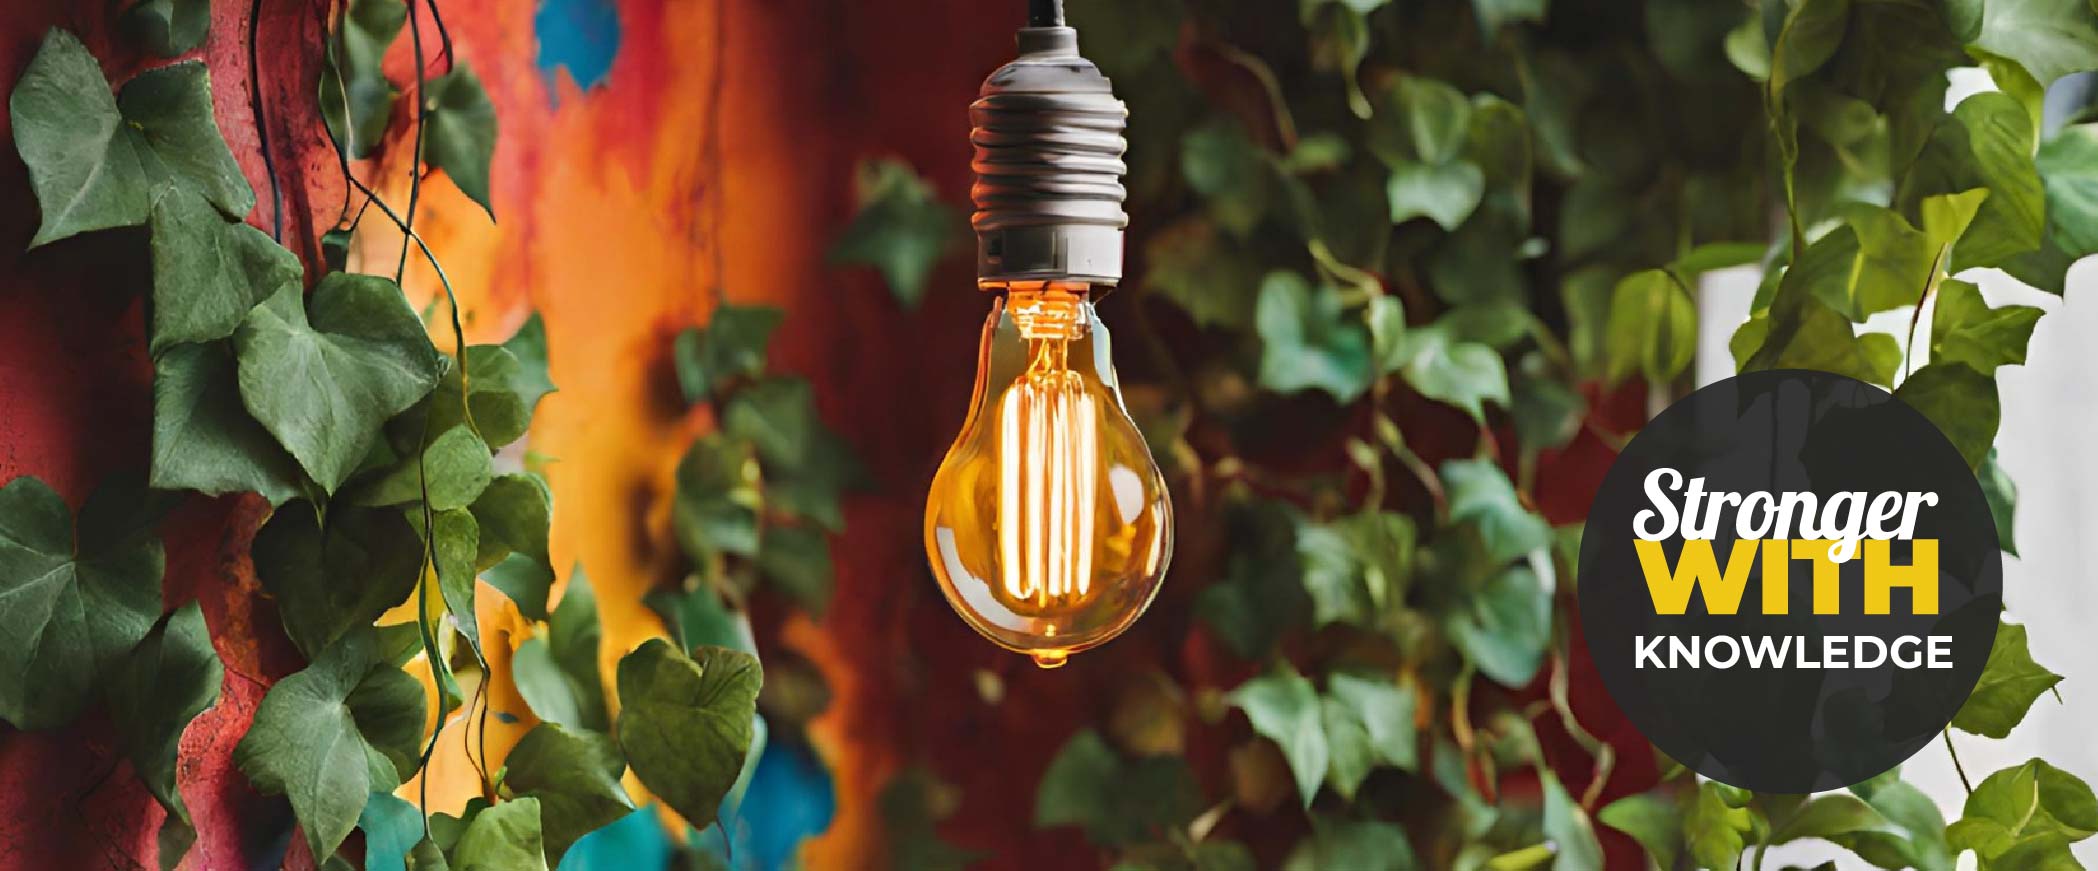 Hanging lightbulb in front of some leaves